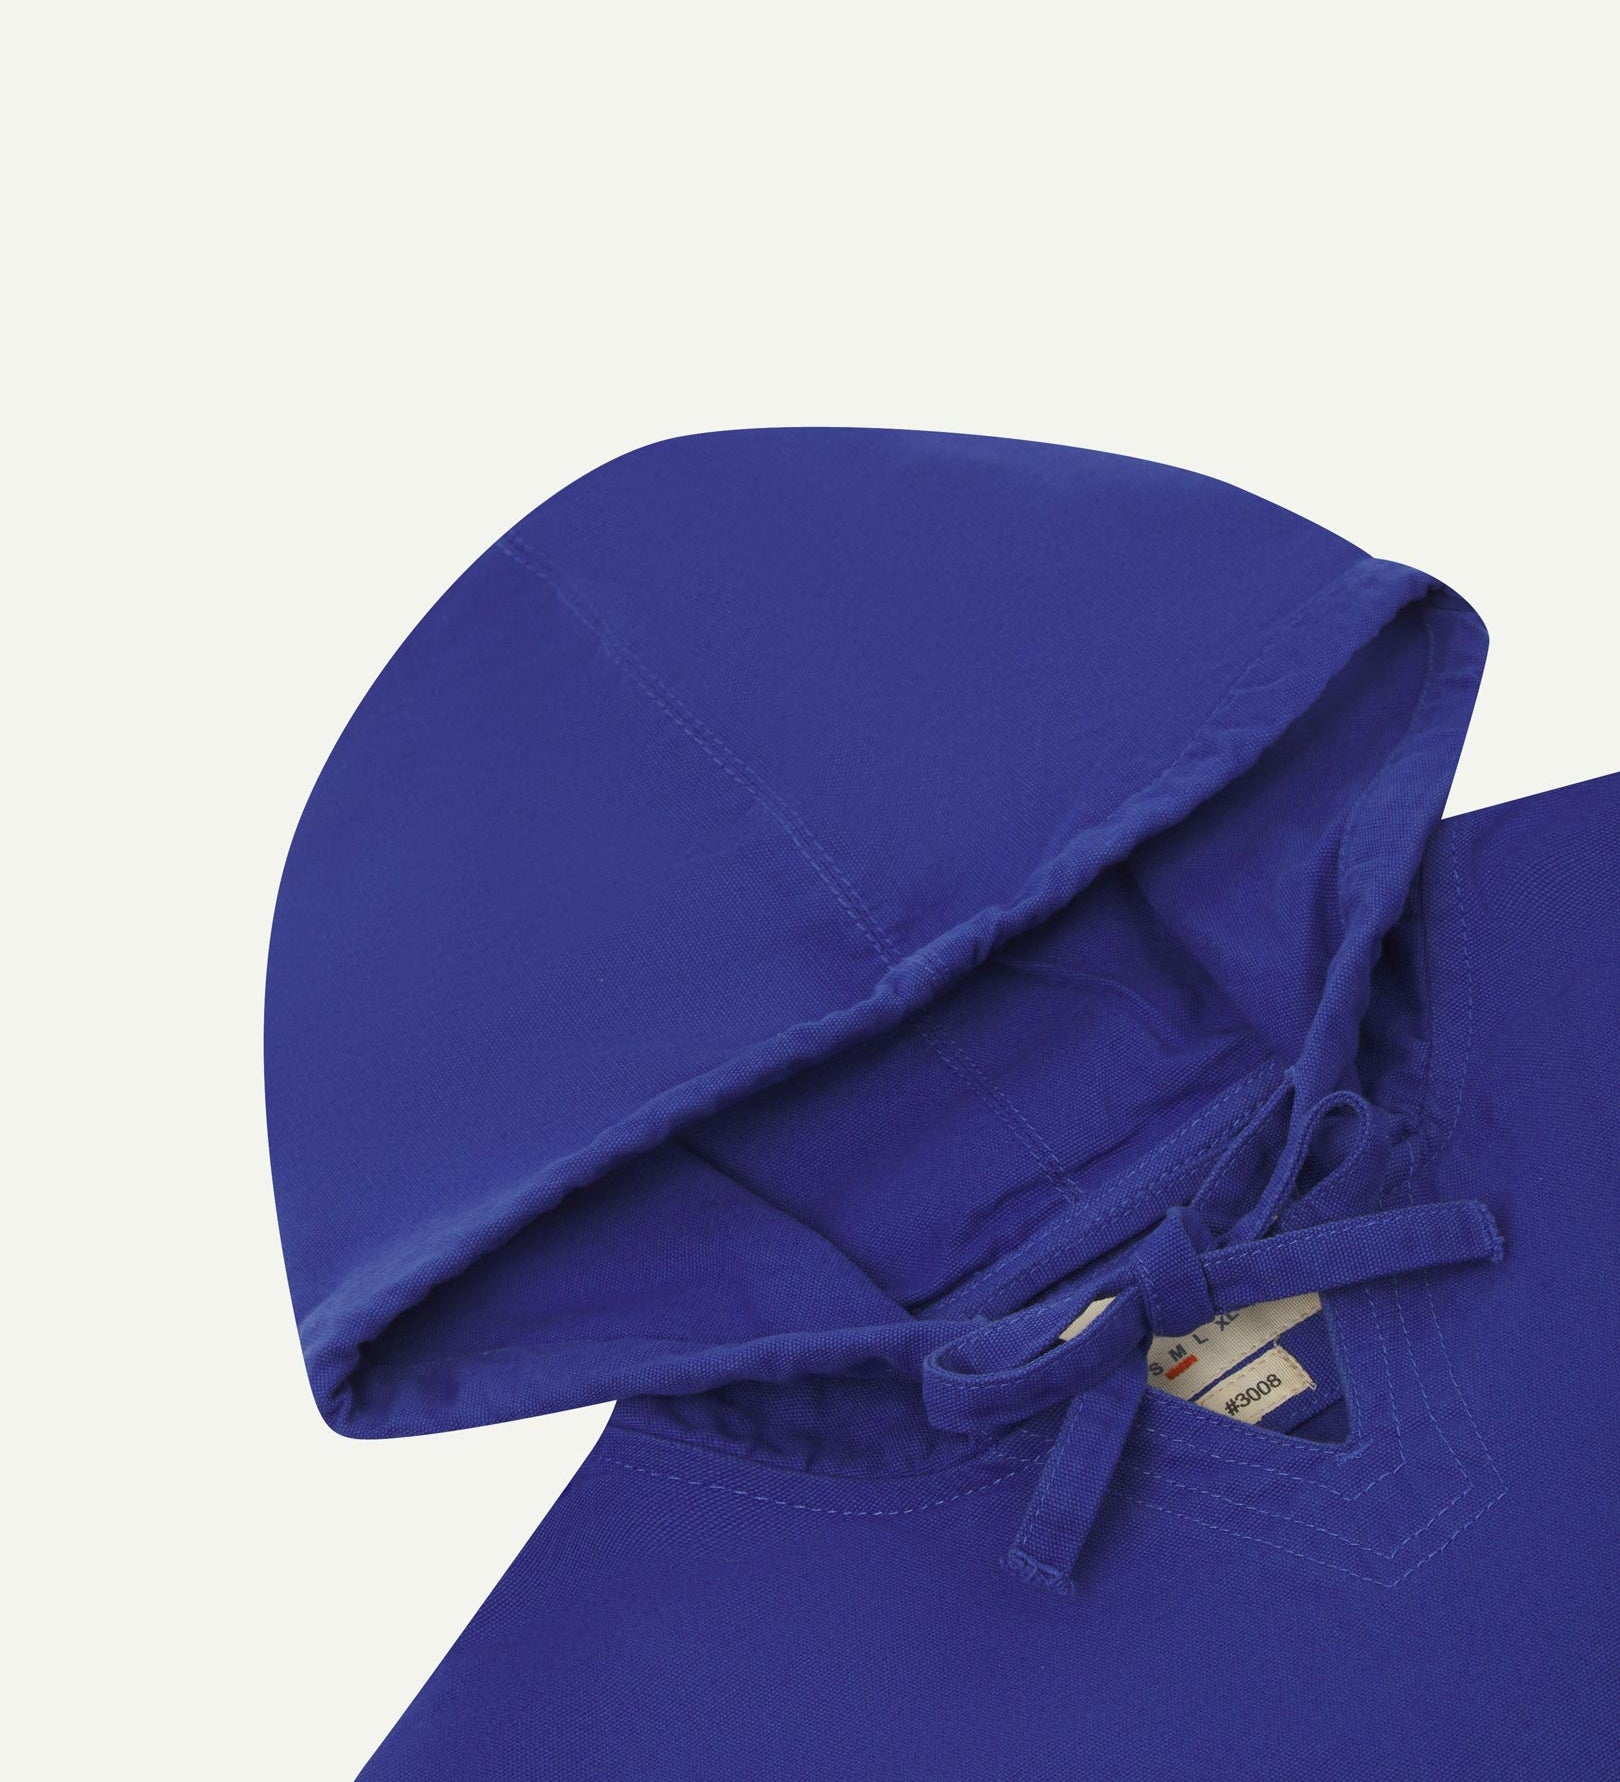 Closer look at the hood of the Uskees organic cotton smock in ultra blue showing hood, hood drawstring and quadruply stitched neck area.